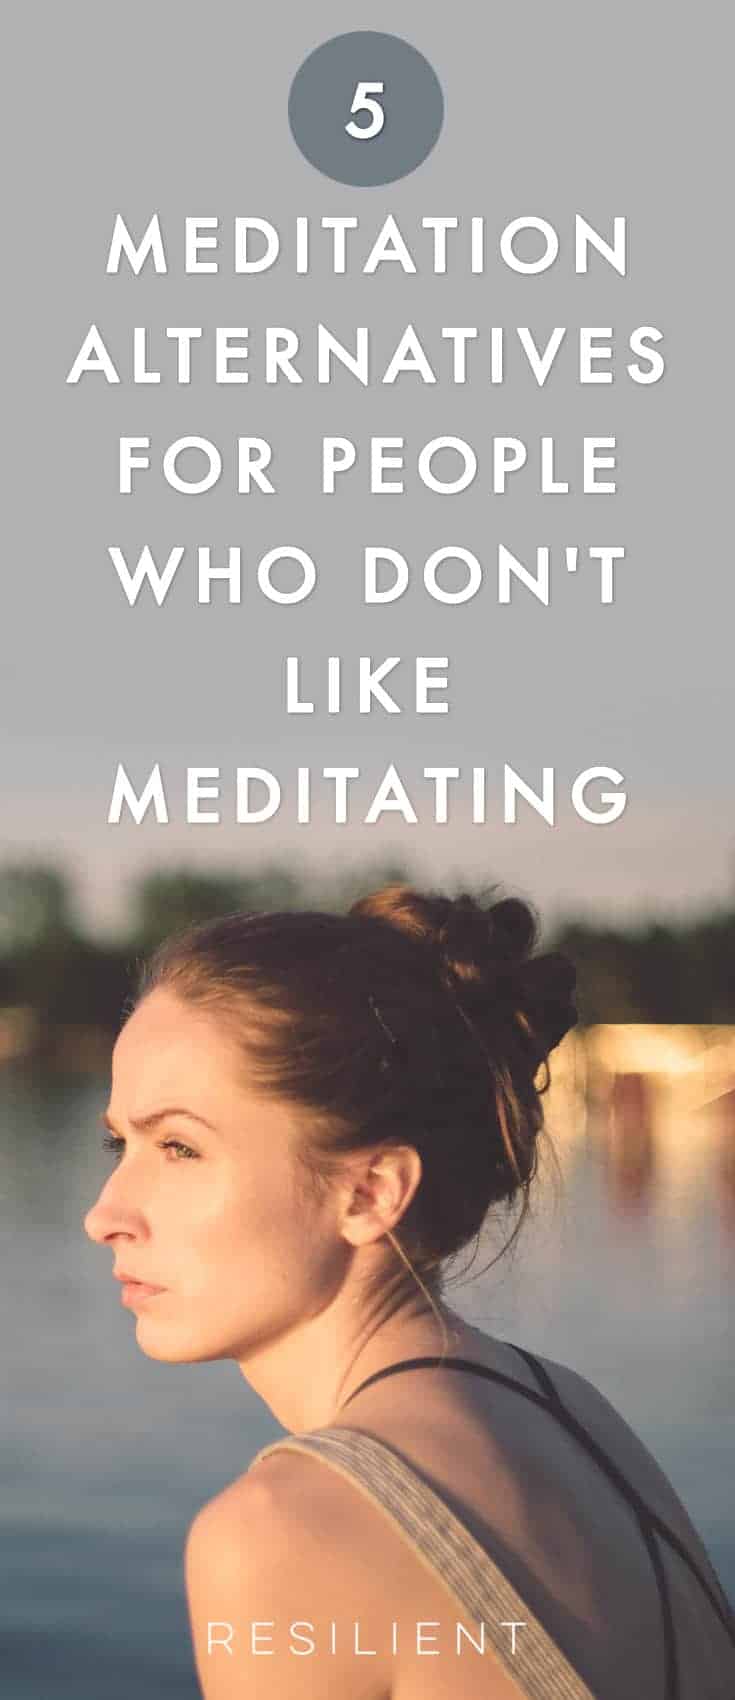 Meditation is scientifically proven to lower your stress and help make you happier, but it's not always easy to try to empty your mind for a long period of time. If you're having trouble with meditating, here are 5 meditation alternatives for people who don't like to - or can't - meditate.